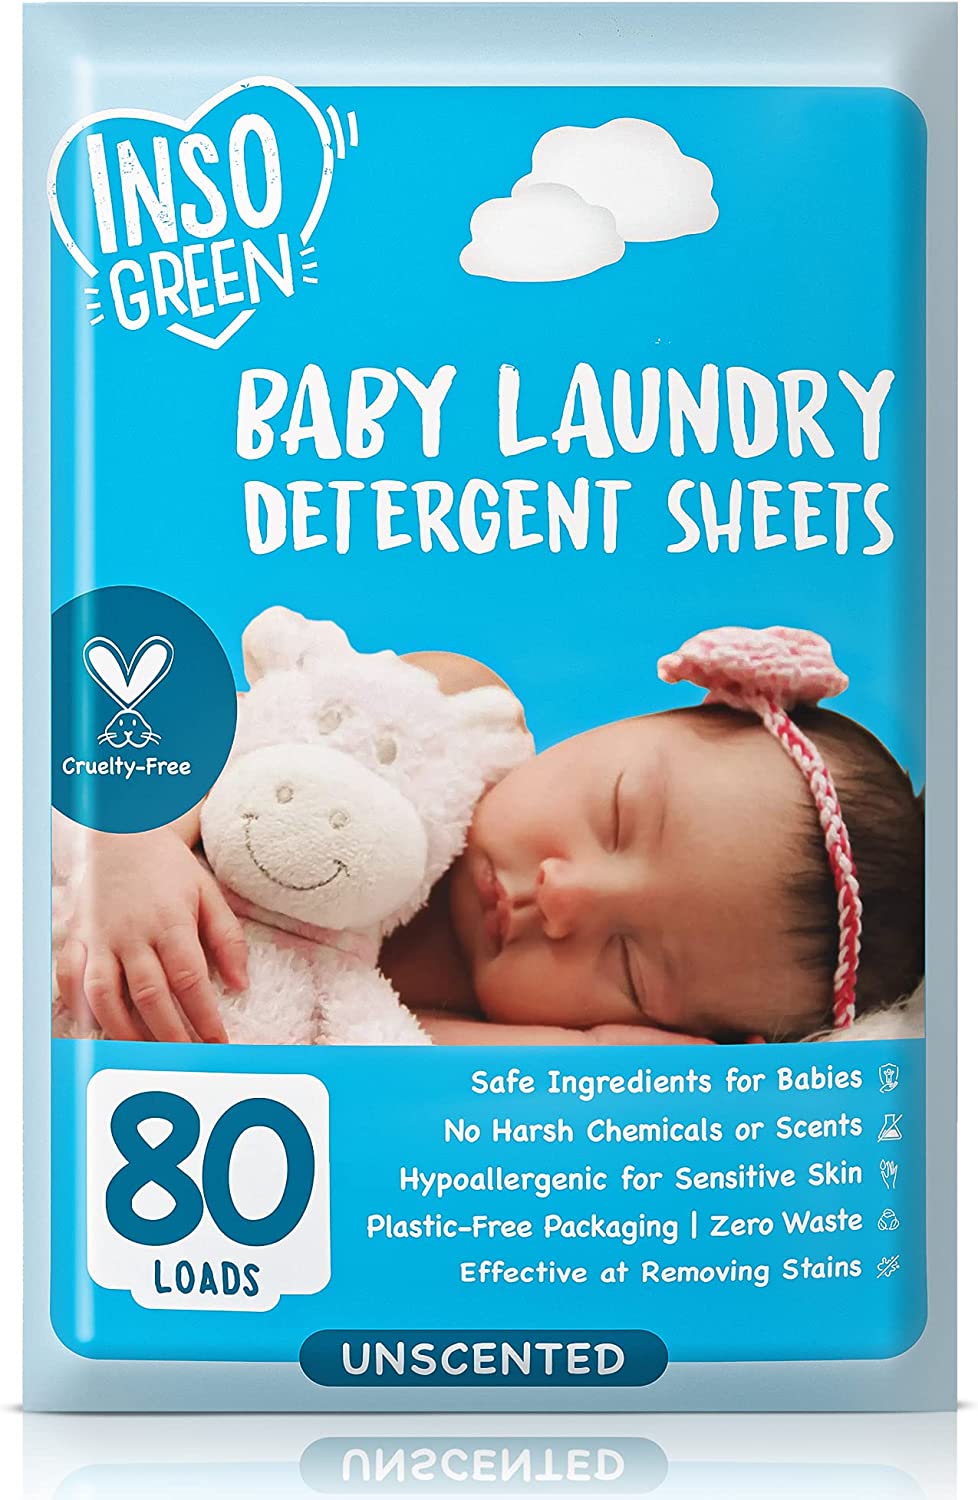 Inso Green Baby Laundry Detergent Sheets